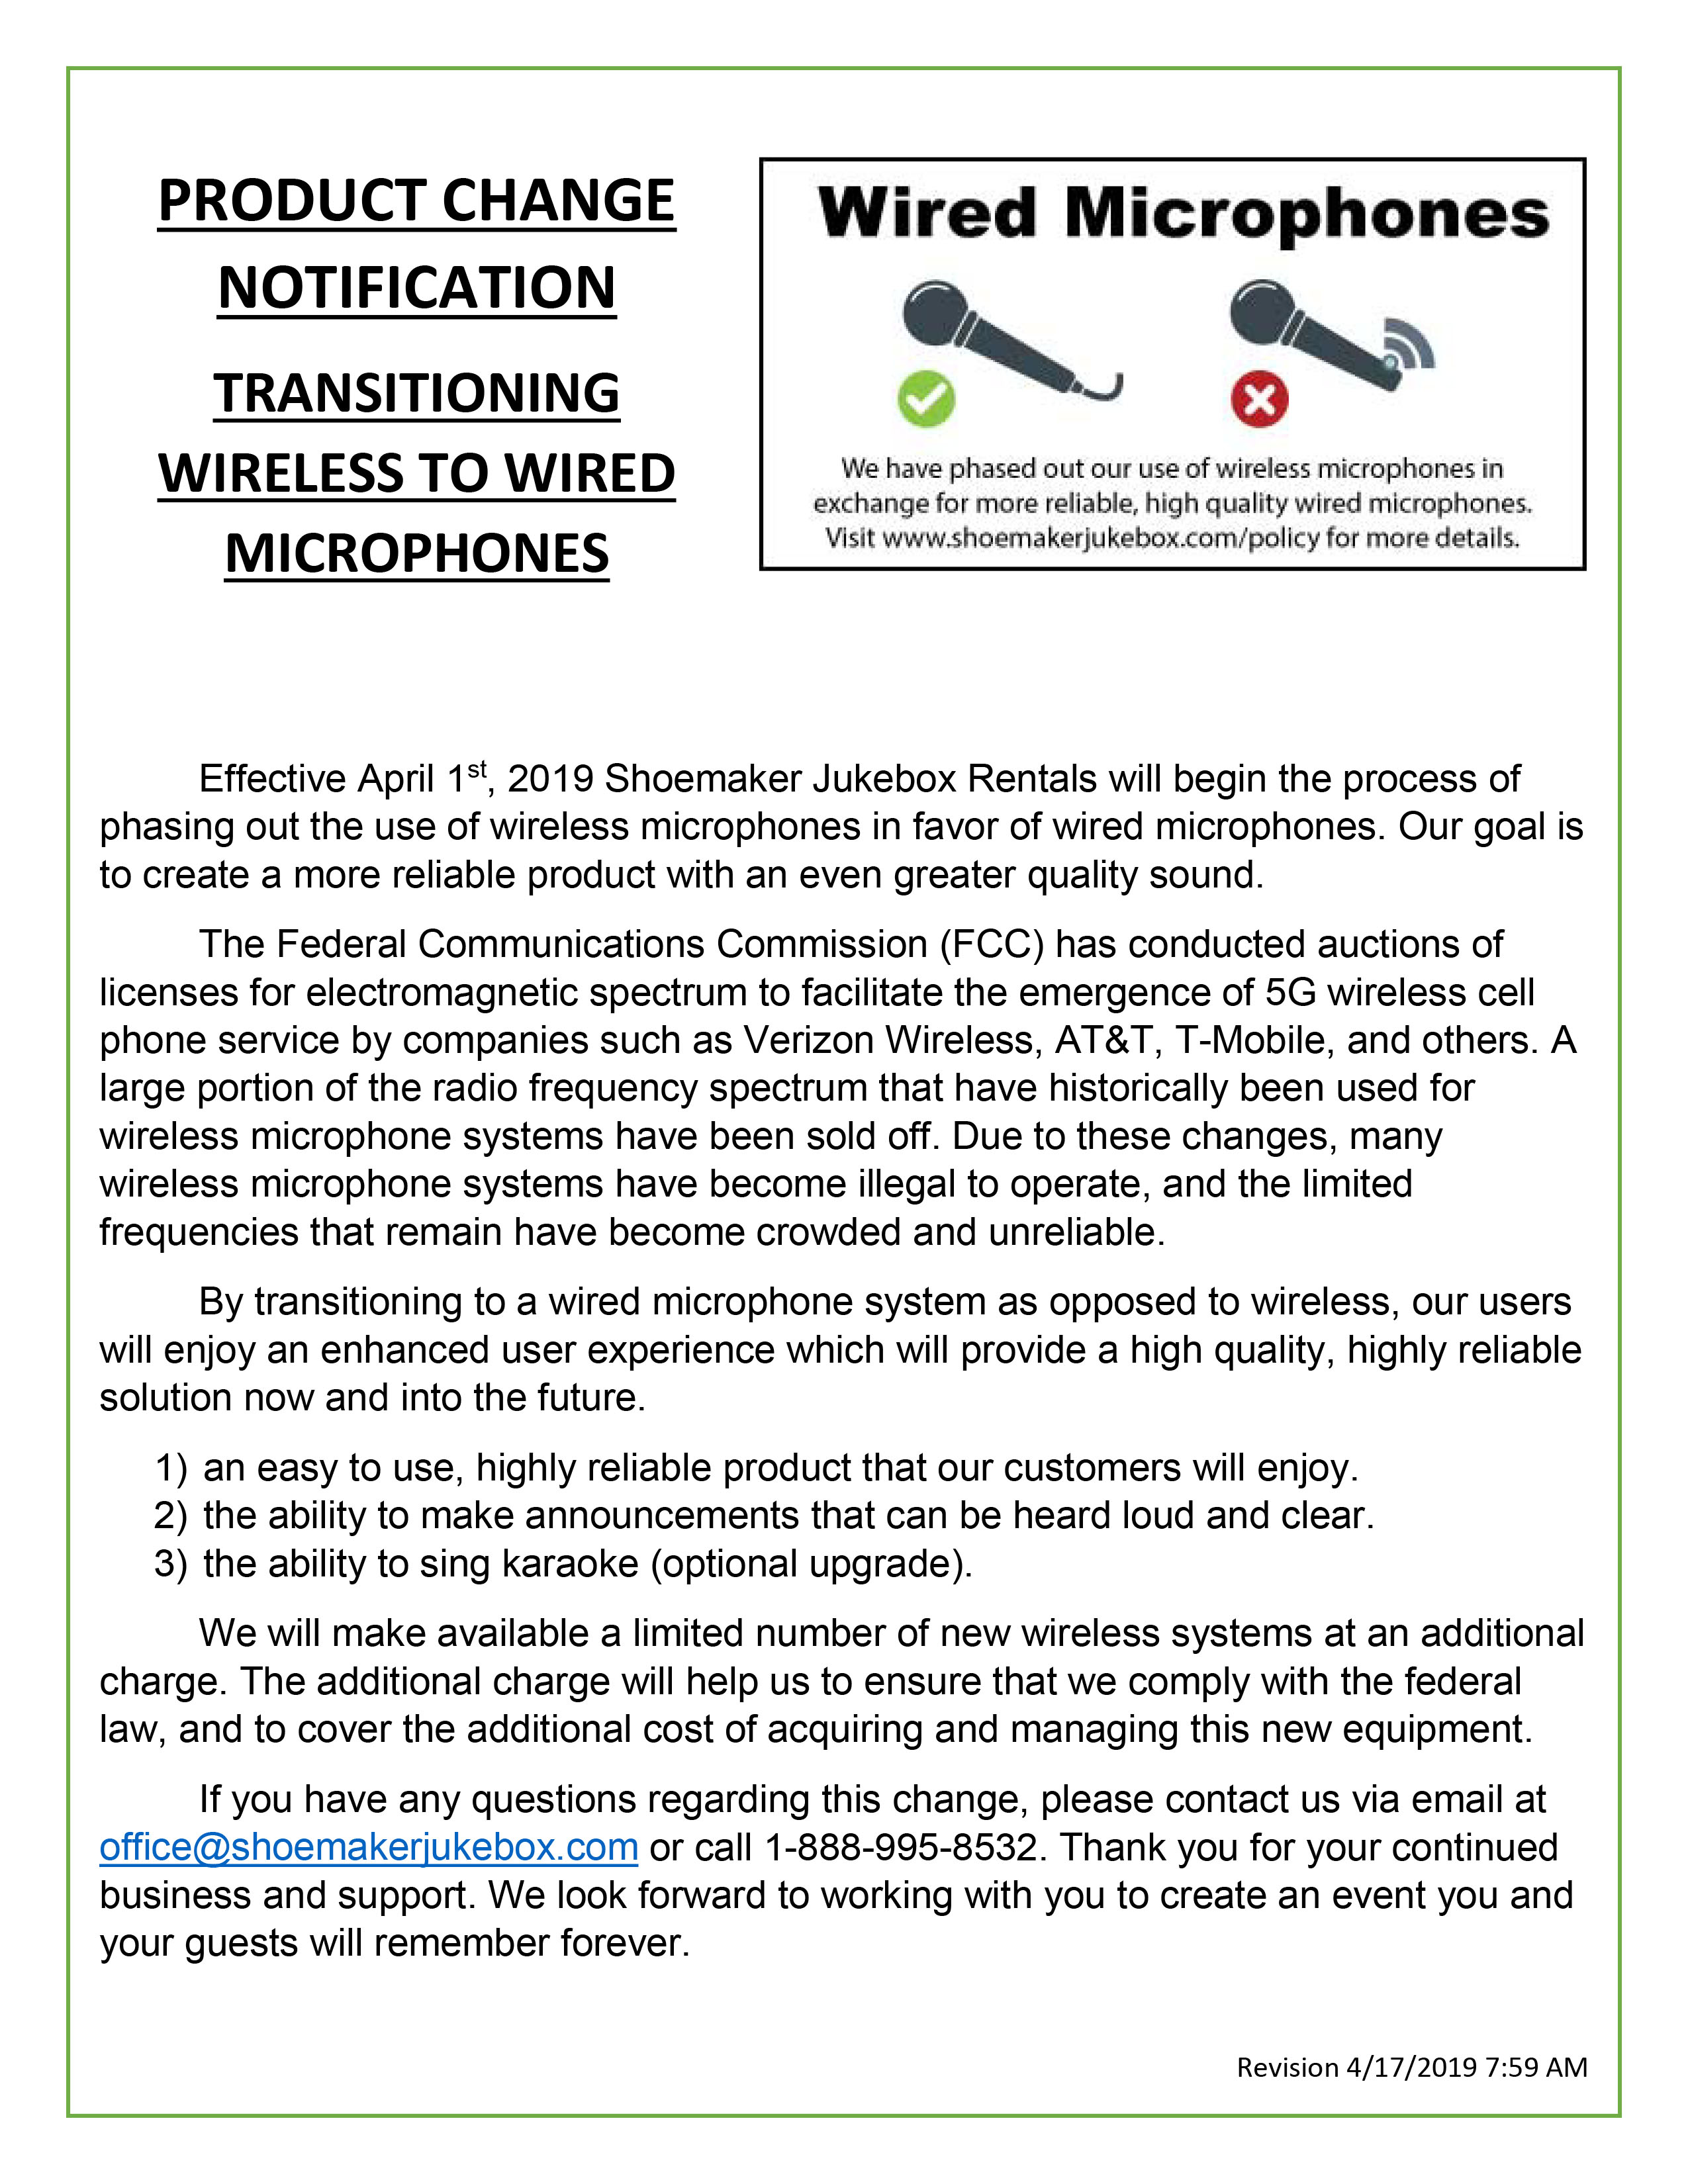 Product Change Notification - Wired Microphones